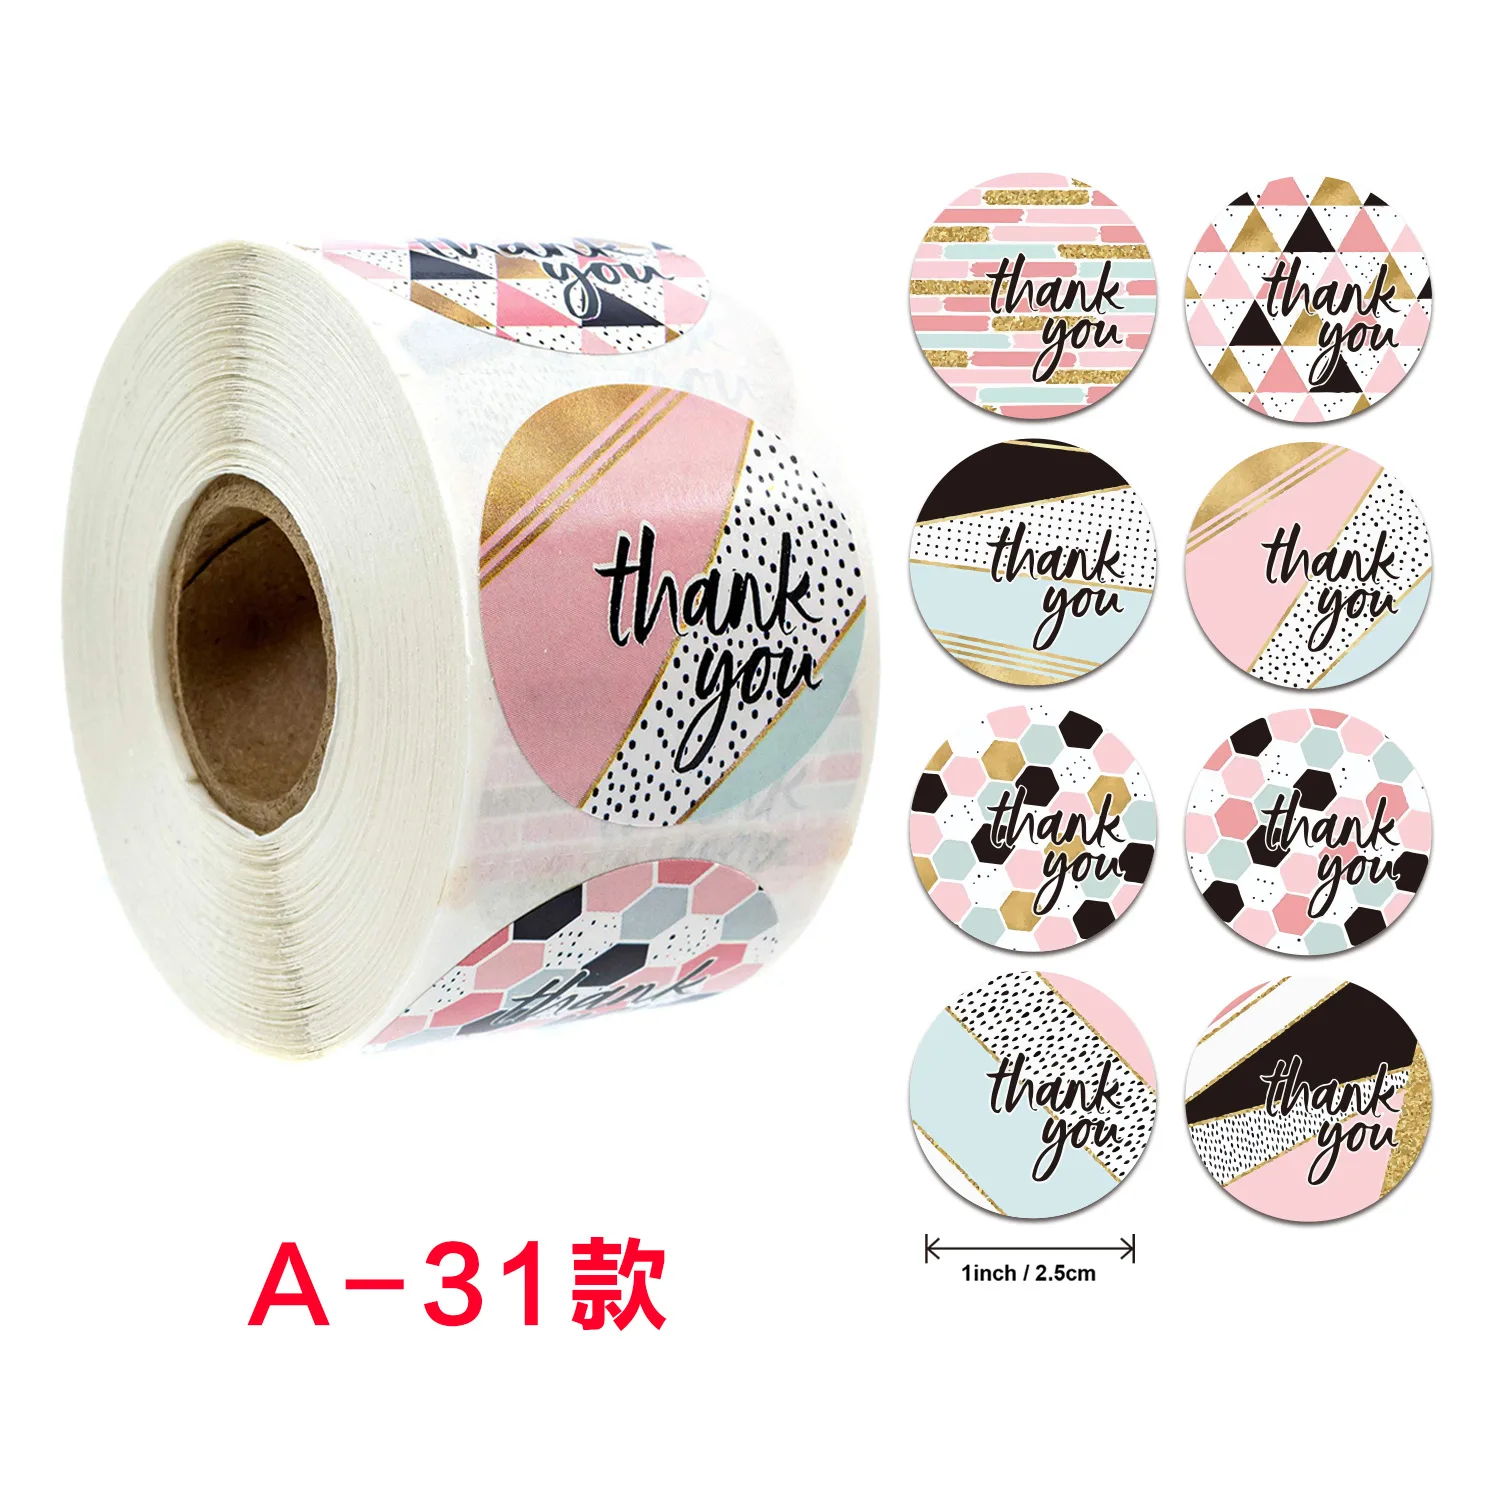 Thank You Sticker Roll Boutique Supplies for Business Packaging 8 Designs Thank You Stickers Roll of 500 1 Inch Thank You Stickers 500 for Bubble Mailers & Bags 